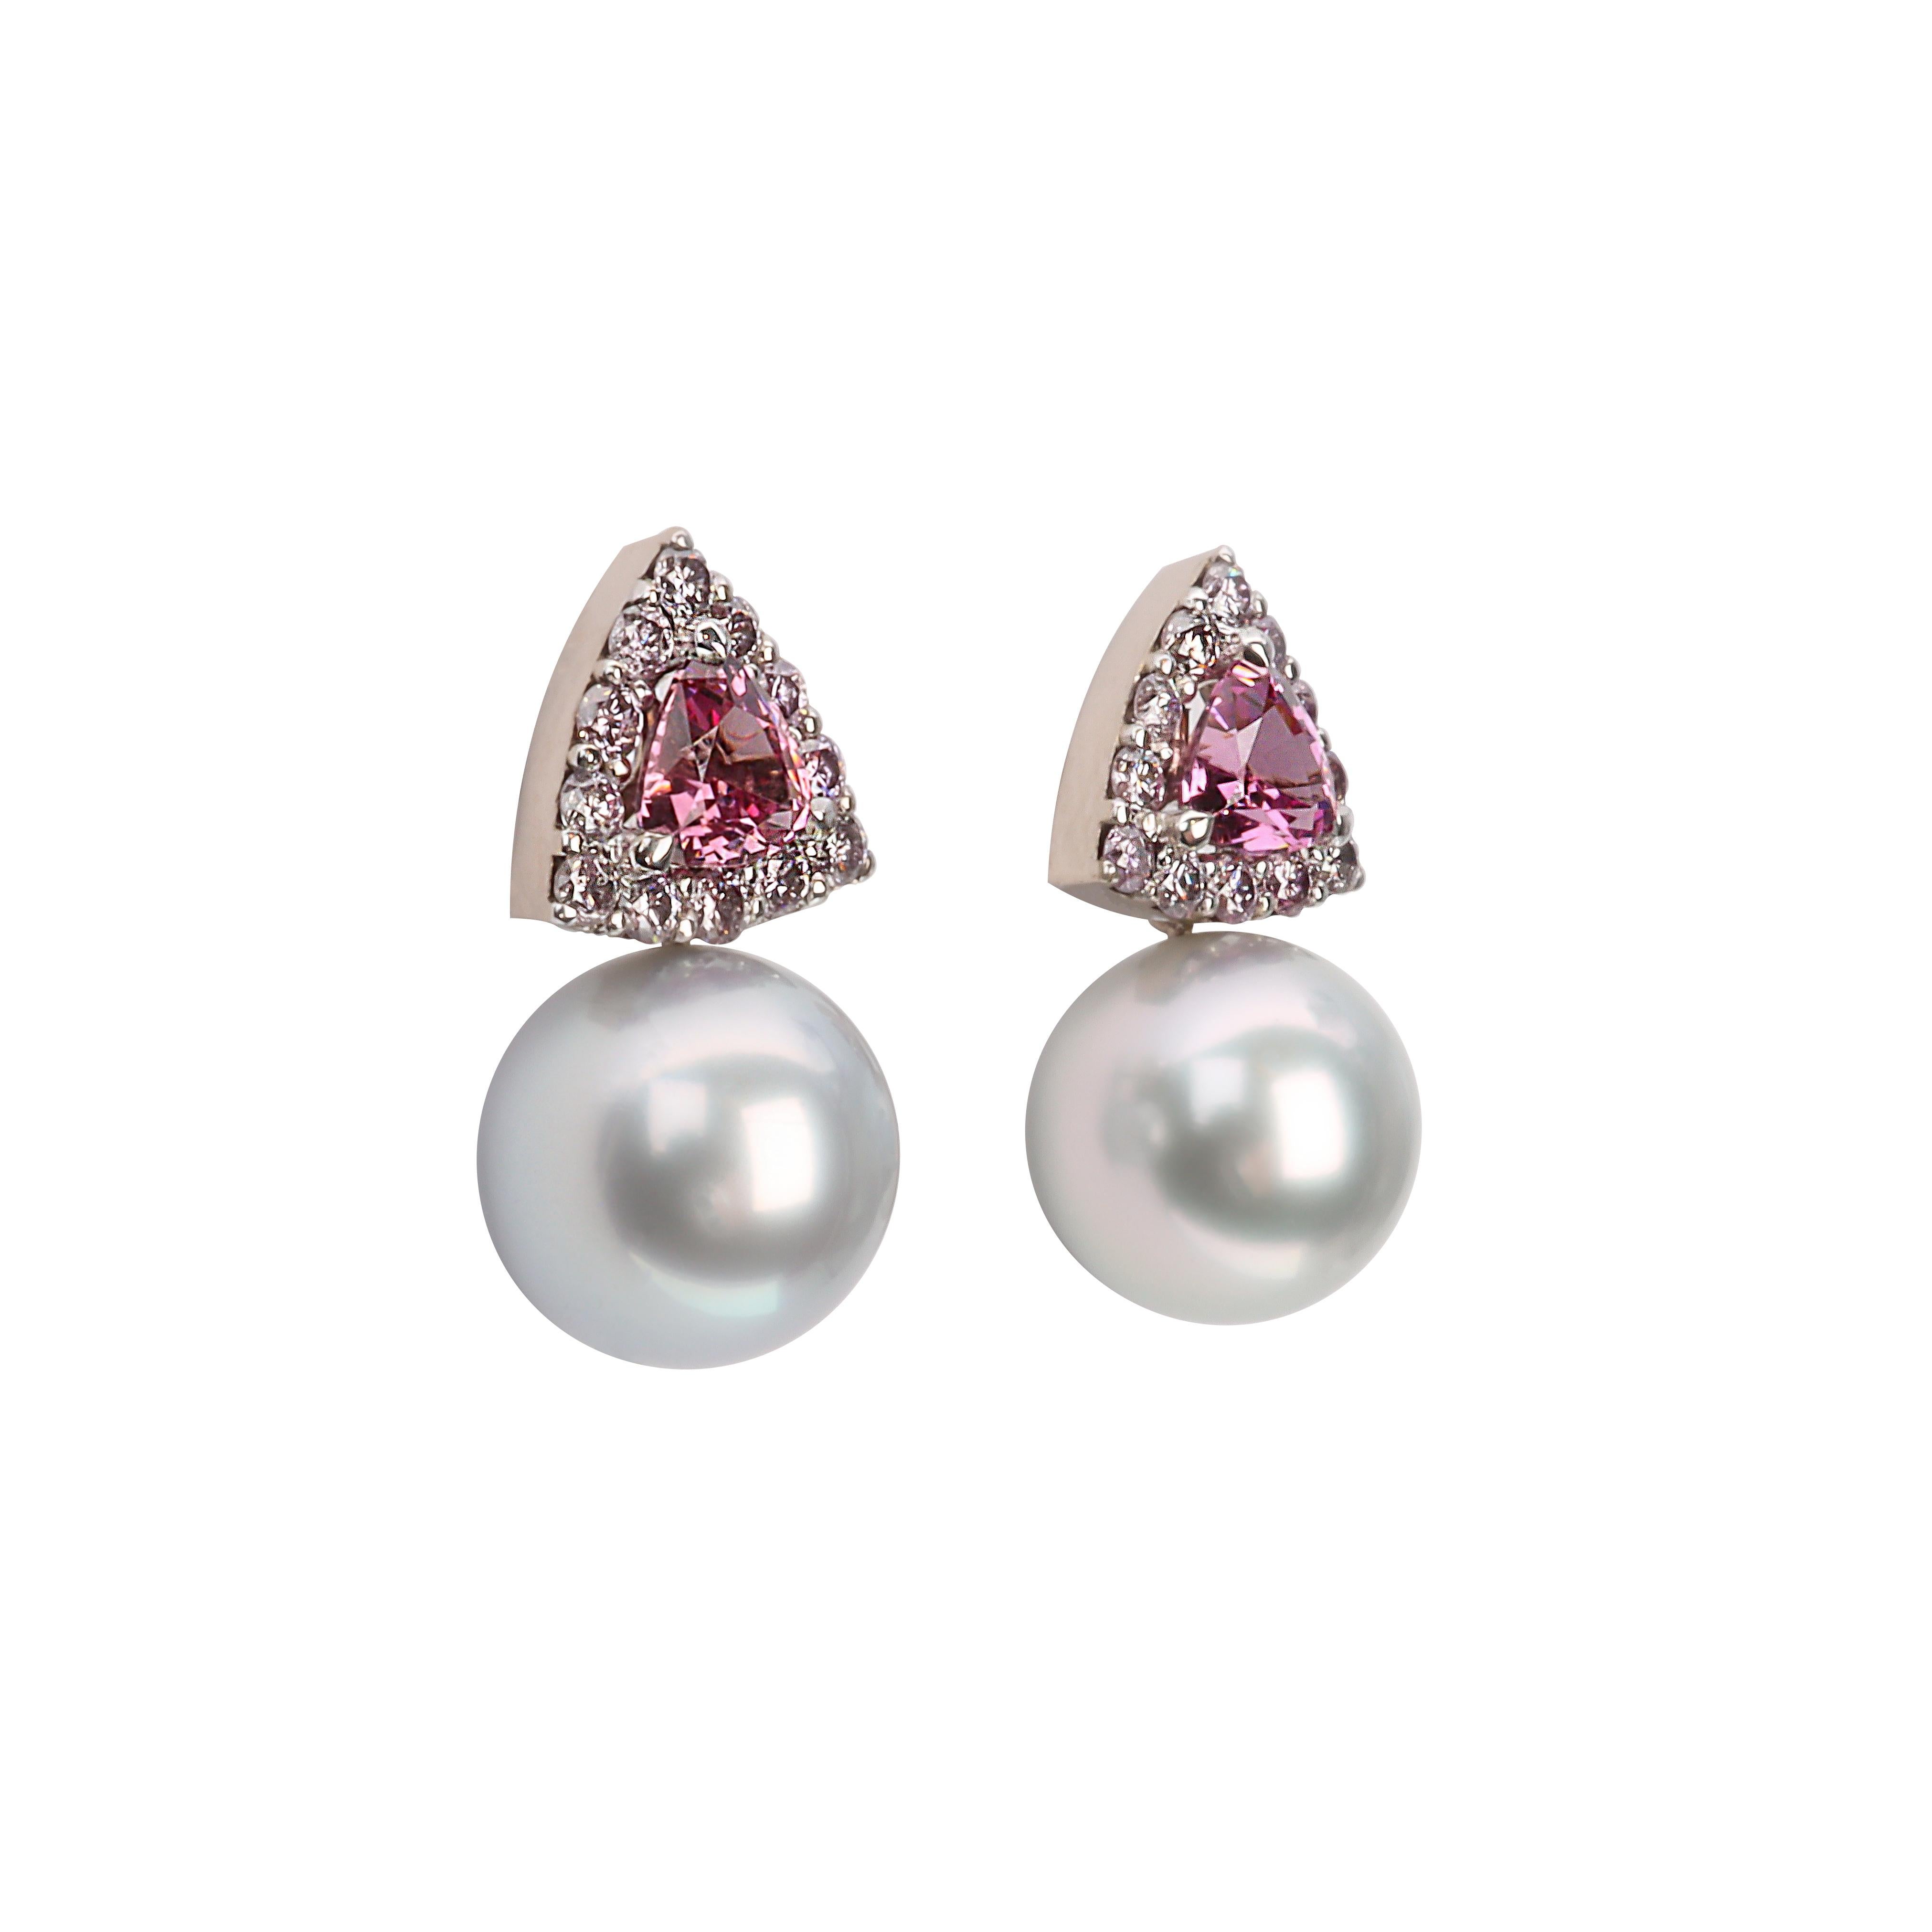  Created by Aventina-Spencer, these one-of-a-kind earrings feature twenty-four rare natural Lavender Diamonds totaling 0.72cts, two trillion cut Traceable Mahenge Malaya Garnets totaling 1.55cts and two exceptional 10.8mm Conscious Tahitian Pearls